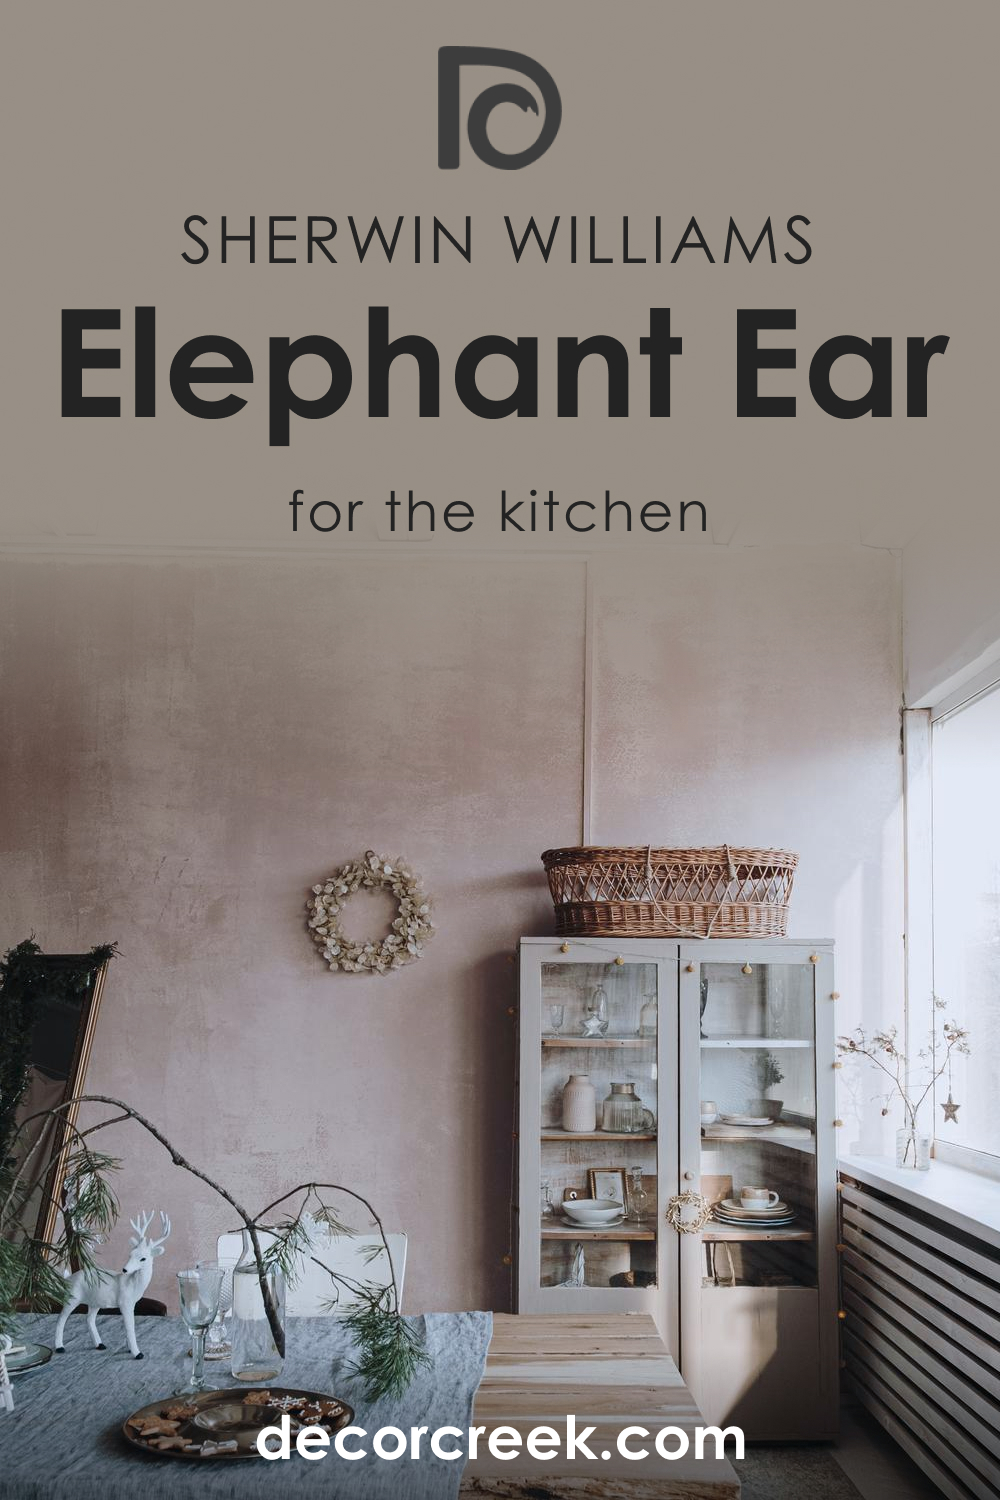 How to Use SW 9168 Elephant Ear in the Kitchen?